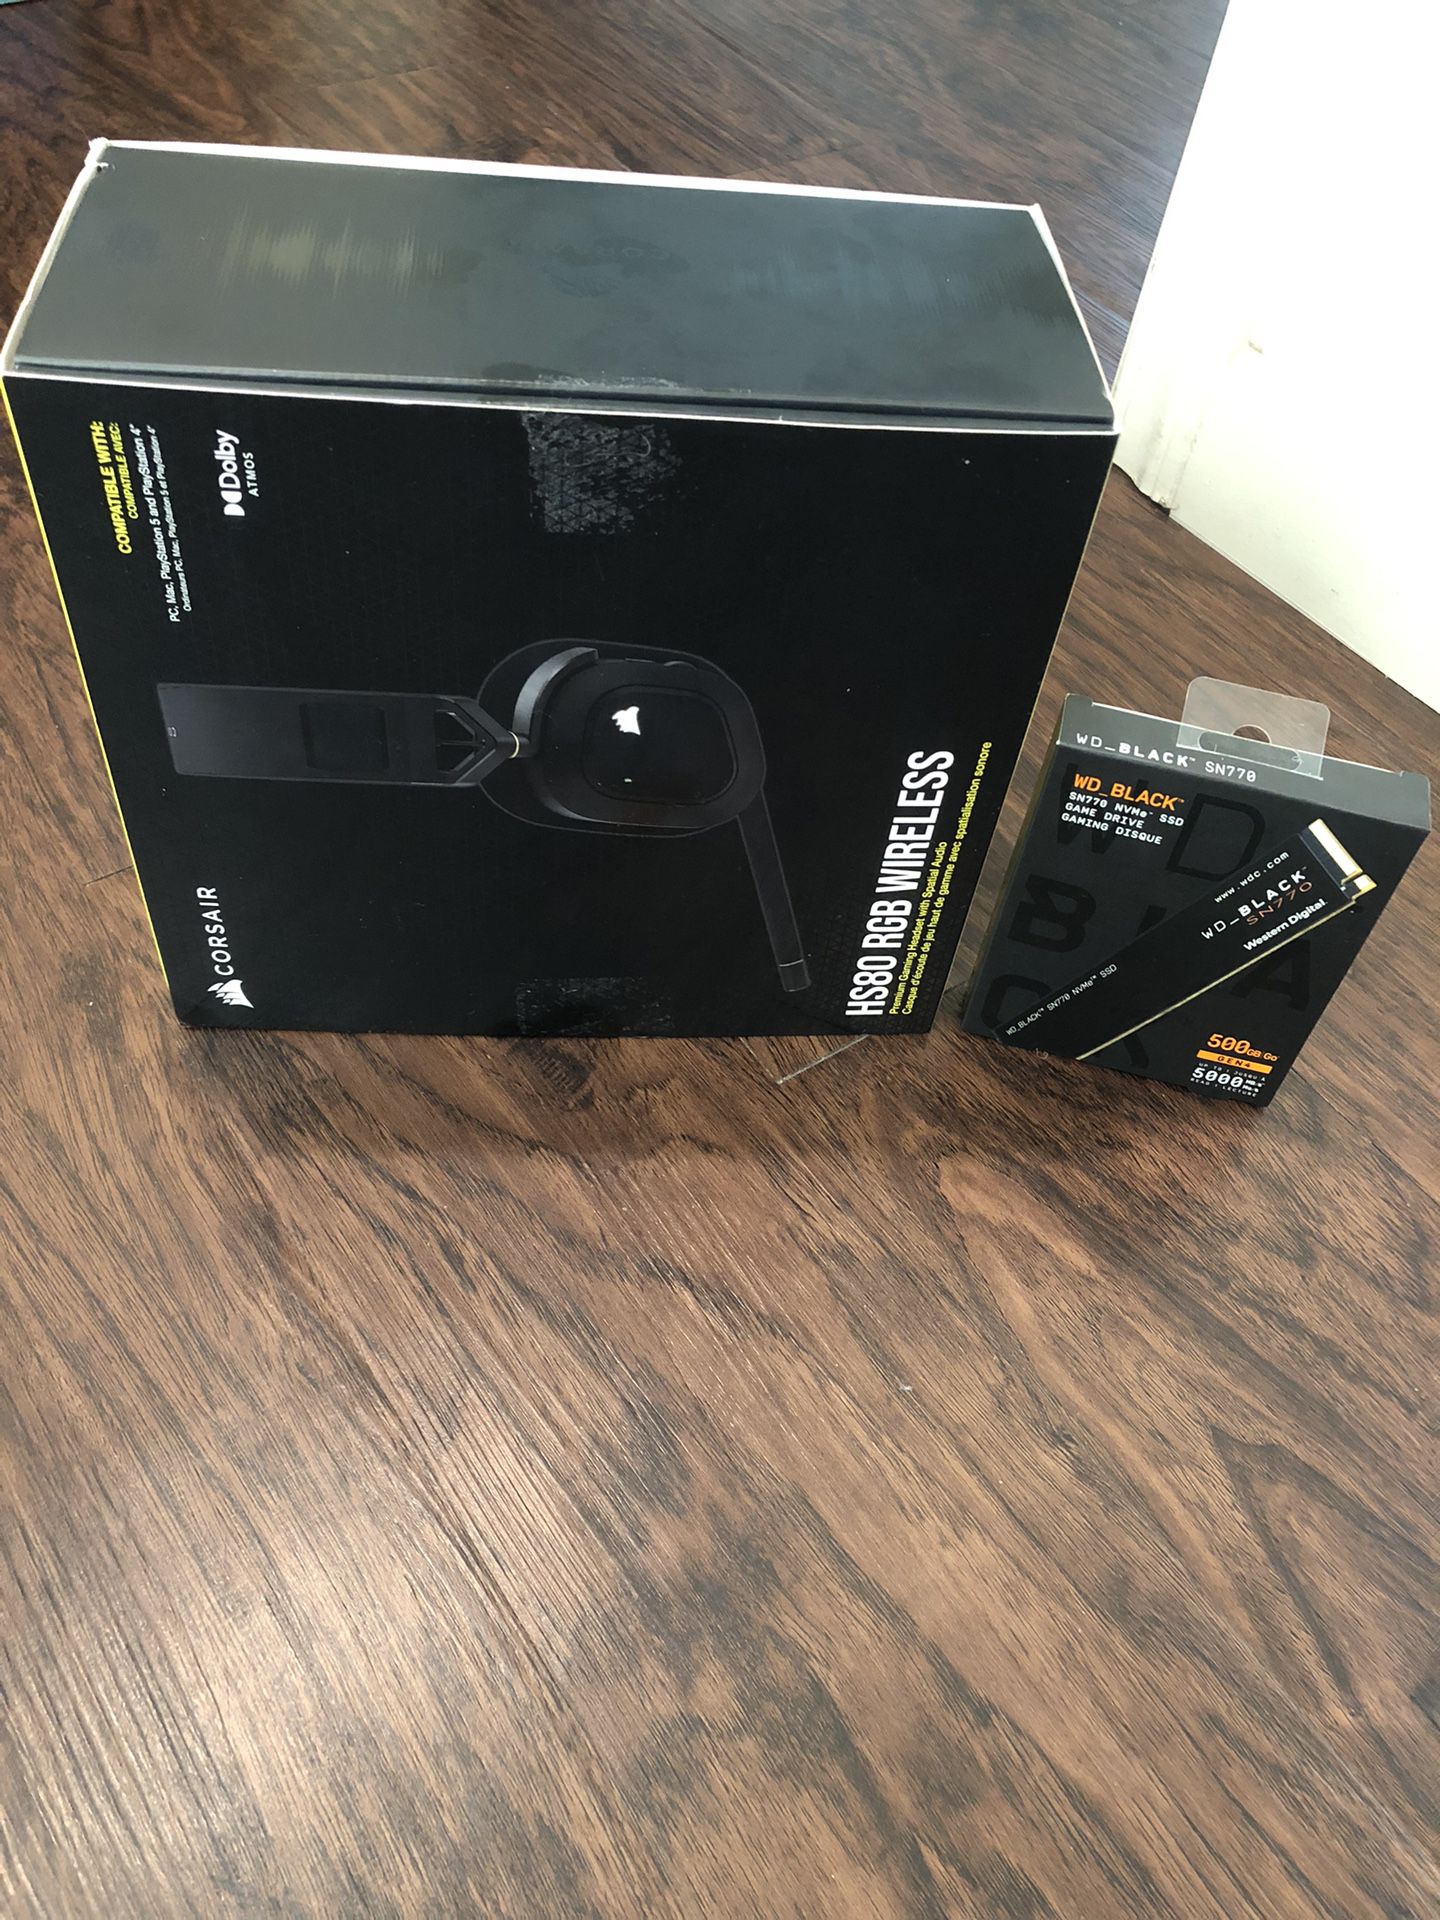 CORSAIR HS80 RGB WIRELESS Multiplatform Gaming Headset With 500GB SN770 NVMe READ DESCRIPTION NO TRADE PICK UP ONLY FIRM ON PRICE💲120 FOR BOTH ONLY💰